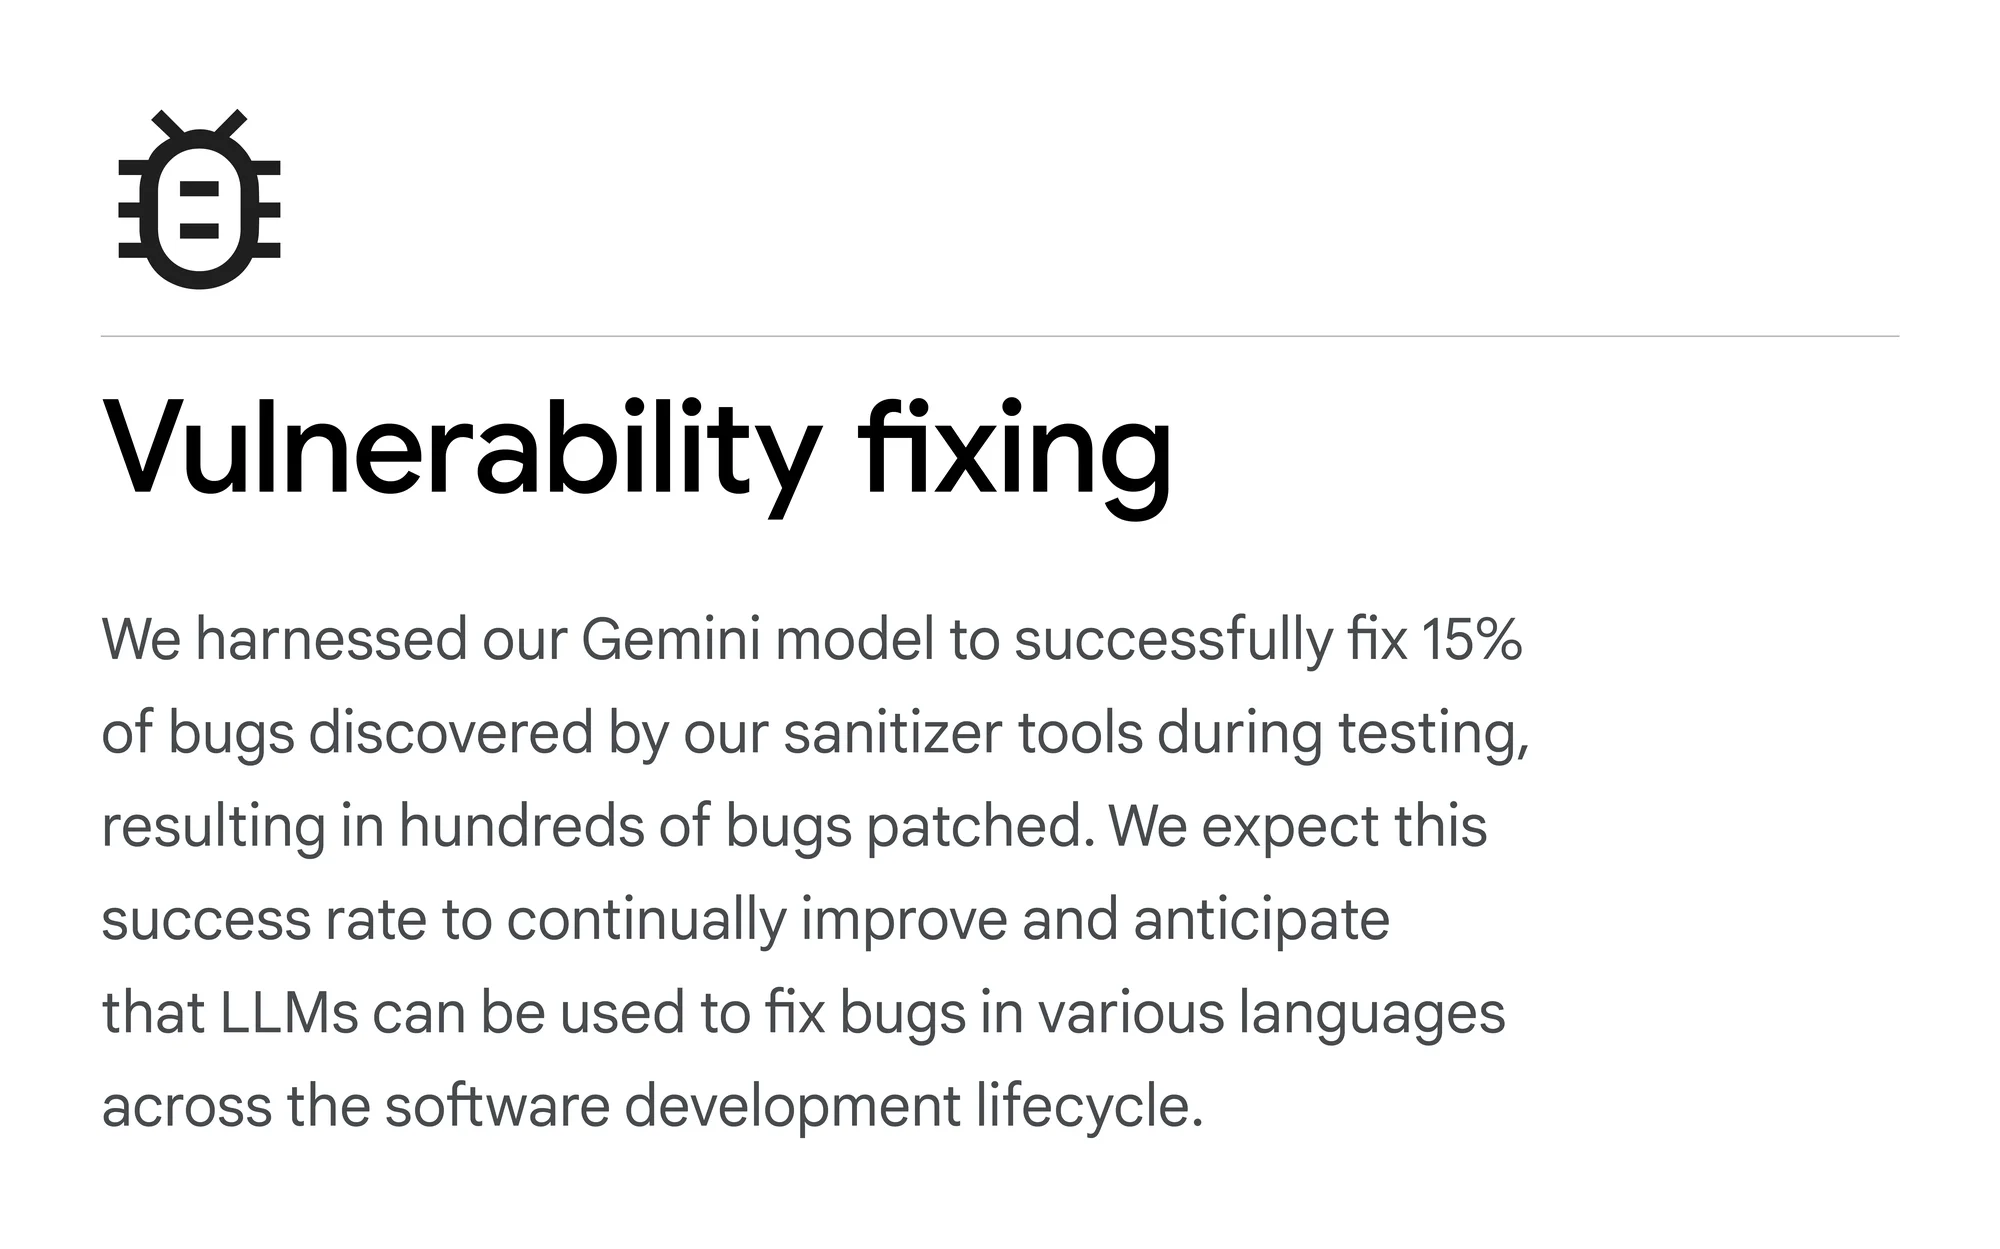 A text card that reads: Vulnerability fixing: We harnessed our Gemini model to successfully fix 15% of bugs discovered by our sanitizer tools during testing, resulting in hundreds of bugs patched. We expect this success rate to continually improve and anticipate that LLMs can be used to fix bugs in various languages across the software development lifecycle.